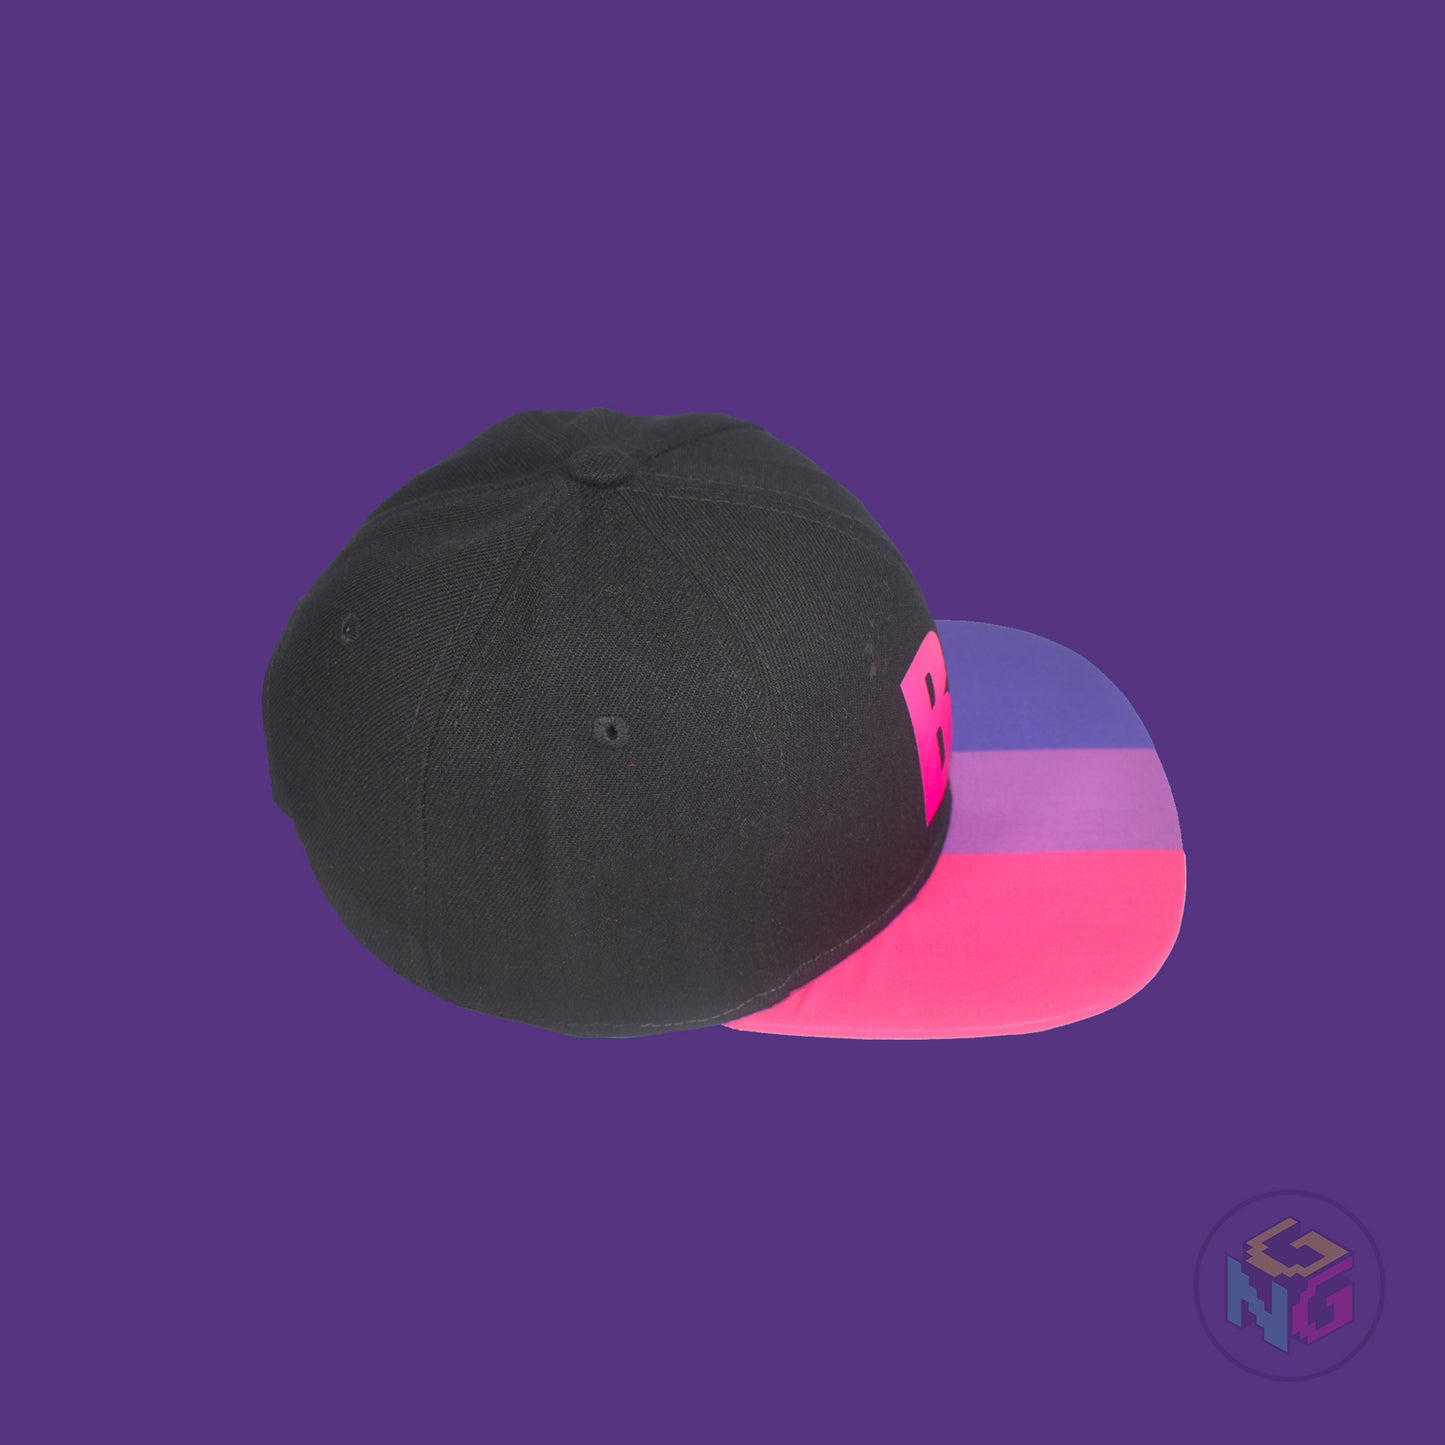 Black flat bill snapback hat. The brim has the bisexual pride flag on both sides and the front of the hat has the word “BI” in pink and blue. Top right view